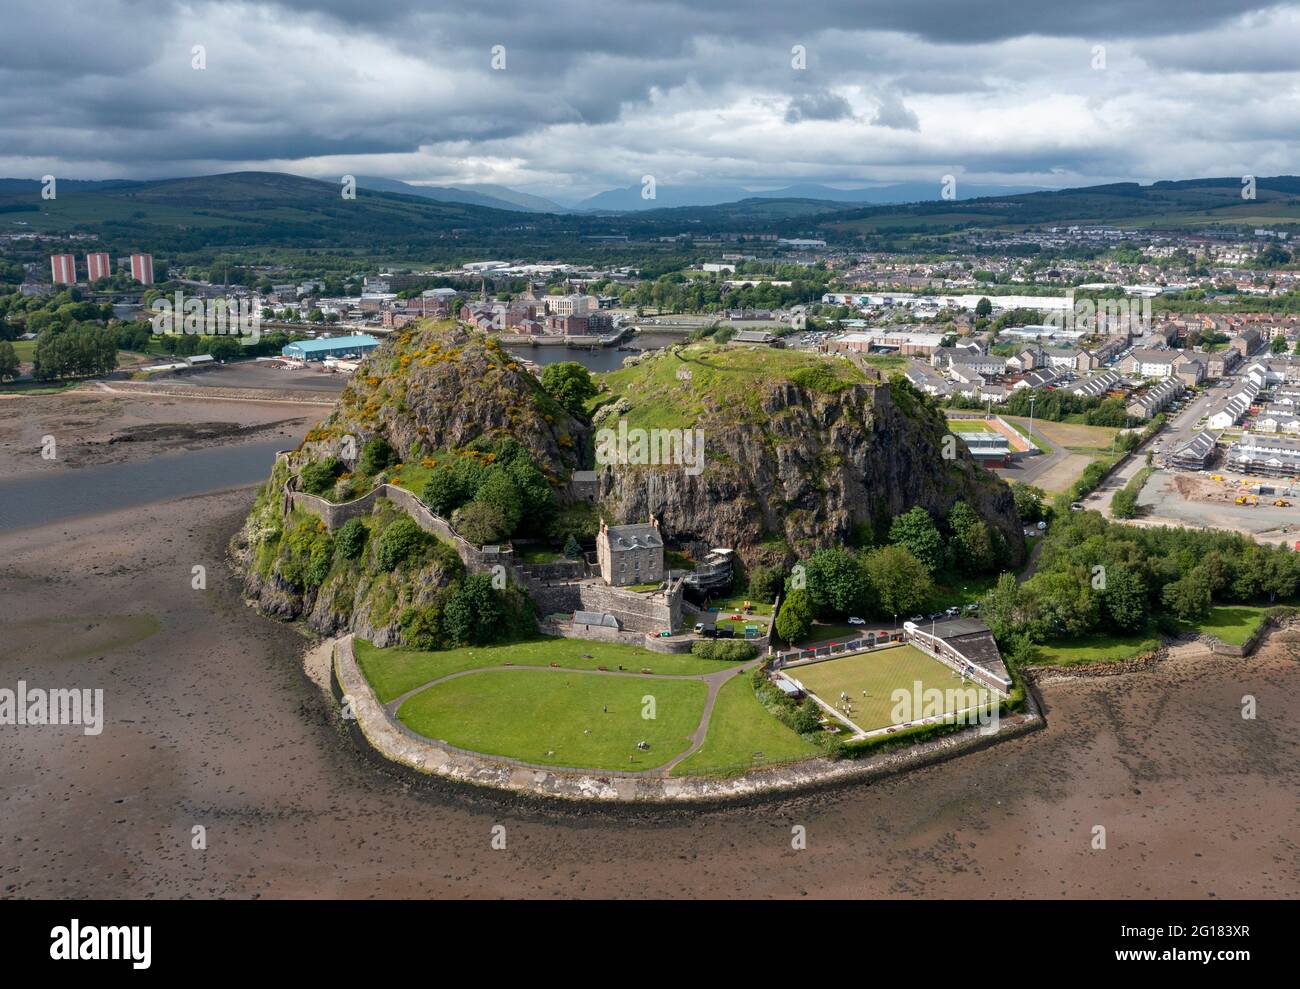 Aerial view of Dumbarton Castle and Dumbarton Rock on the banks of the River Clyde, West Dumbartonshire. Dumbarton Rock Bowling club is bottom right. Stock Photo